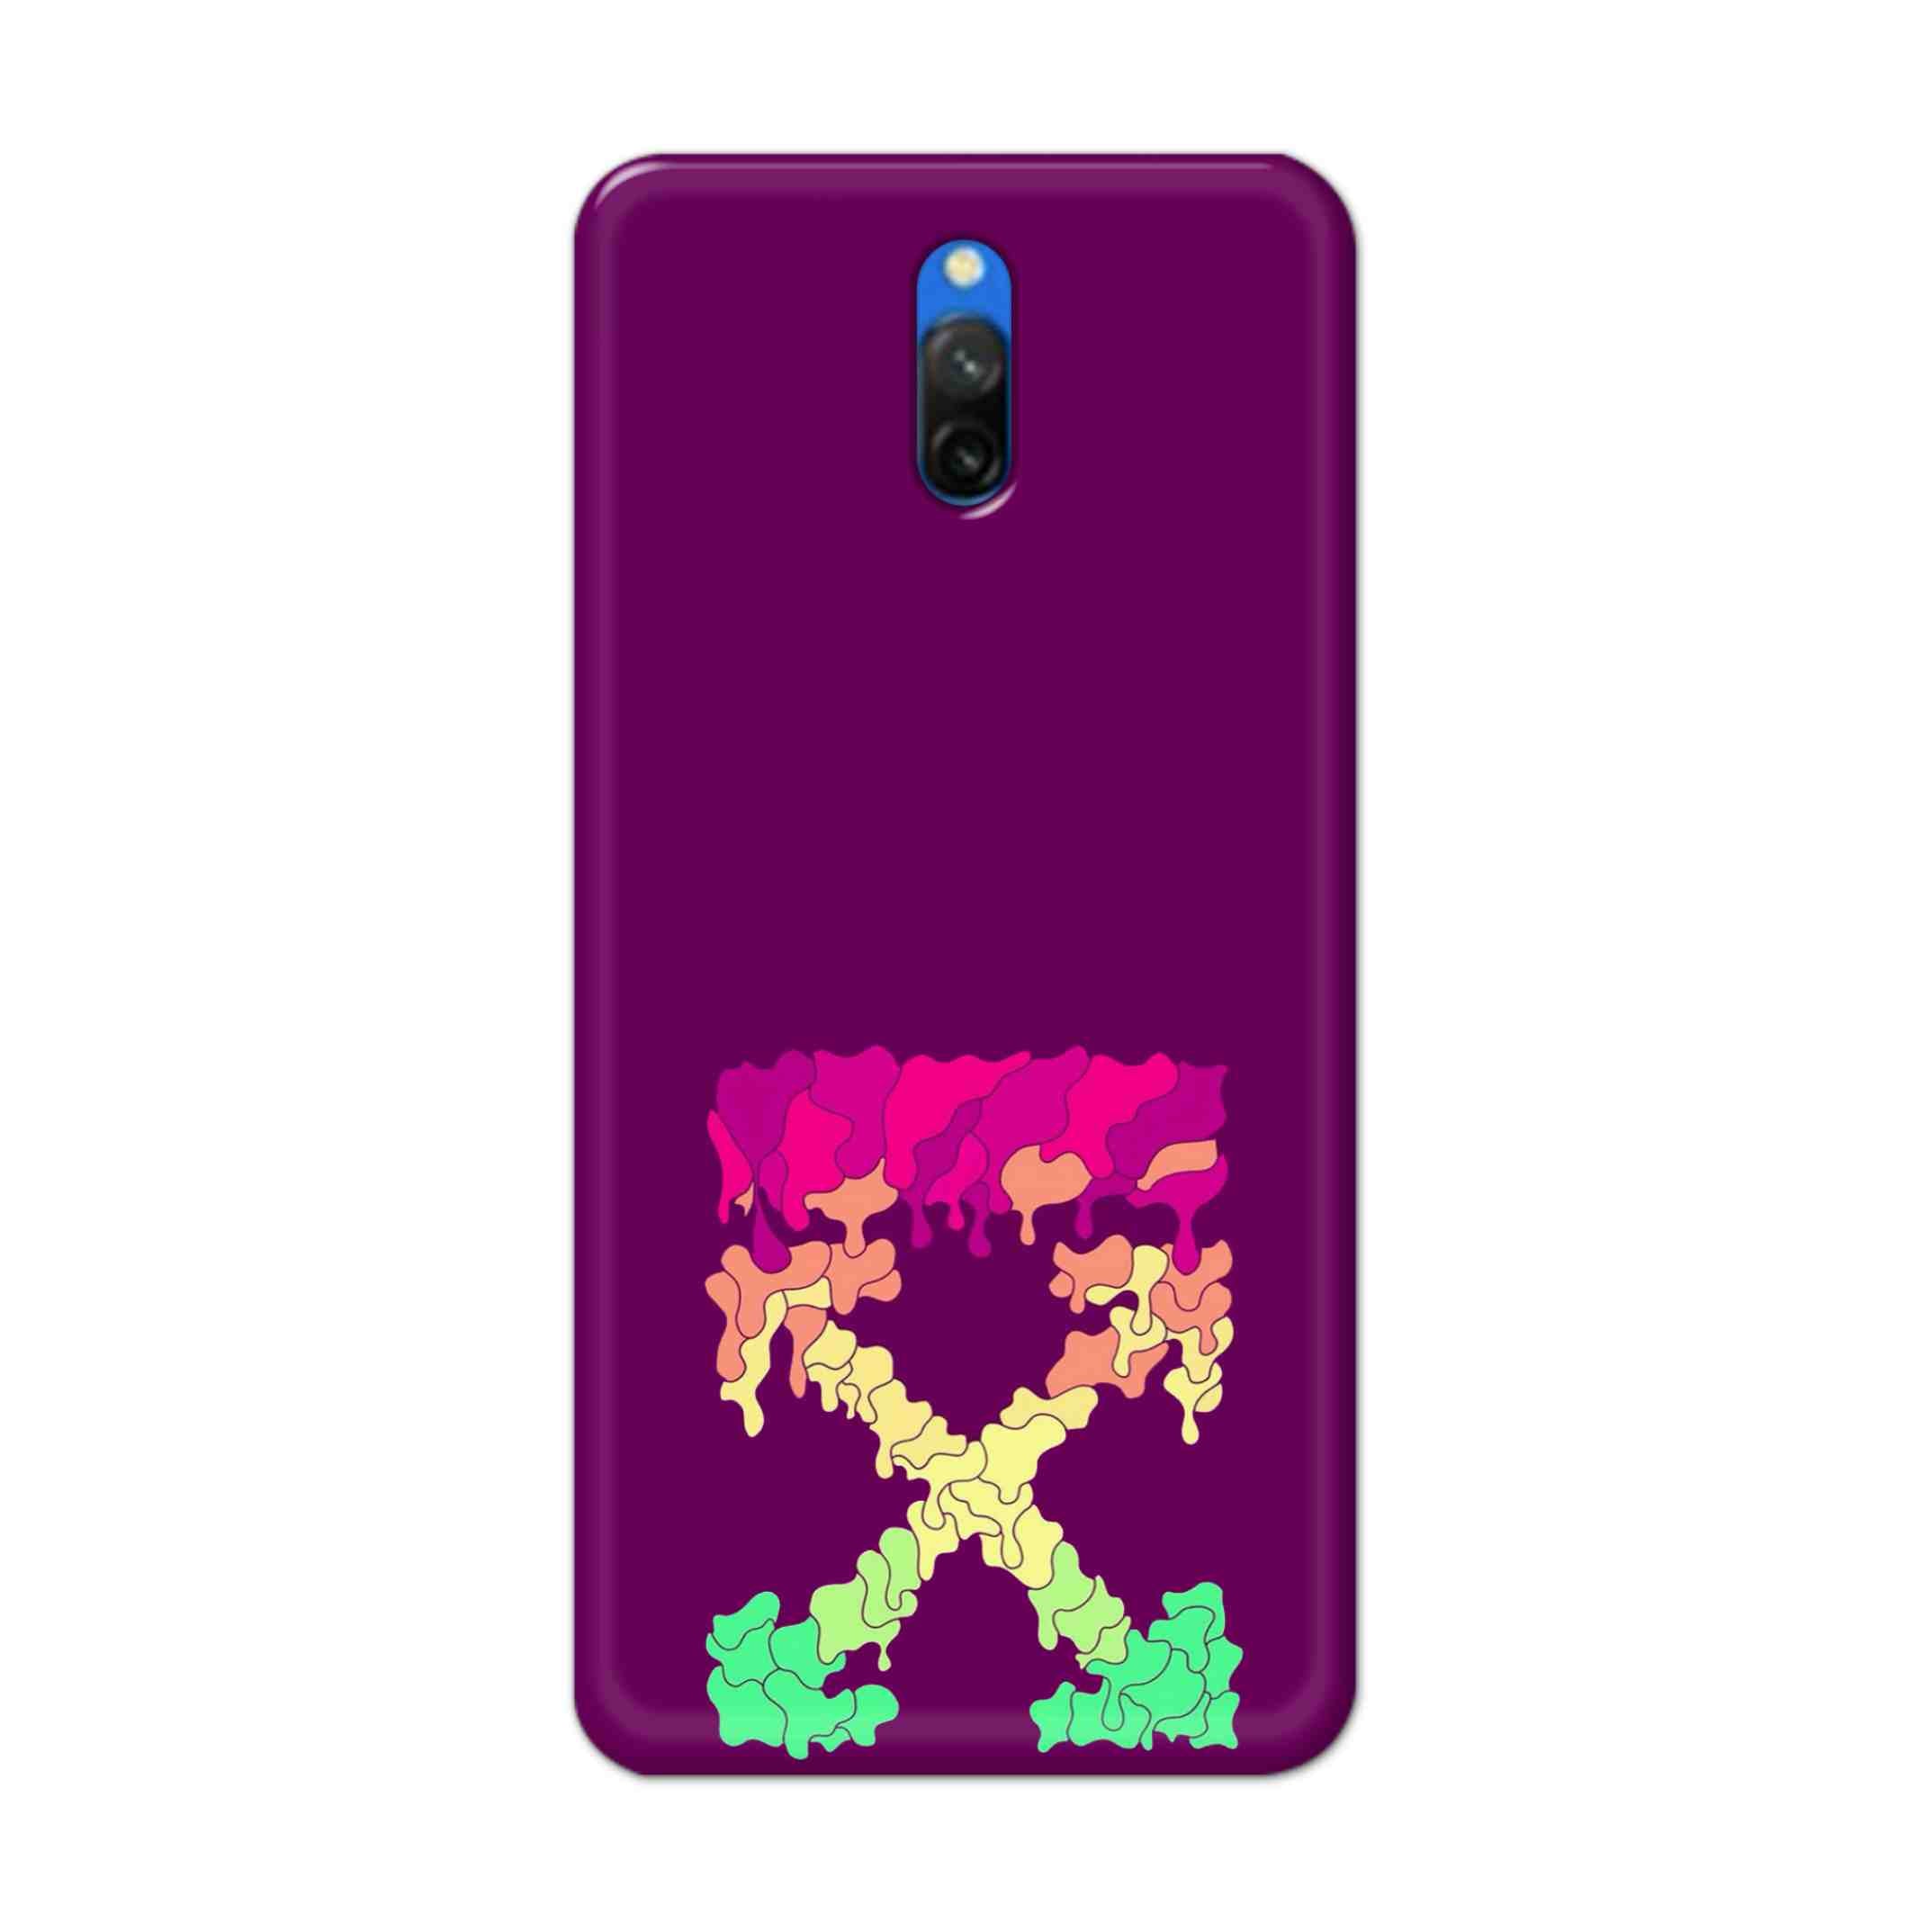 Buy X.O Hard Back Mobile Phone Case/Cover For Redmi 8A Dual Online